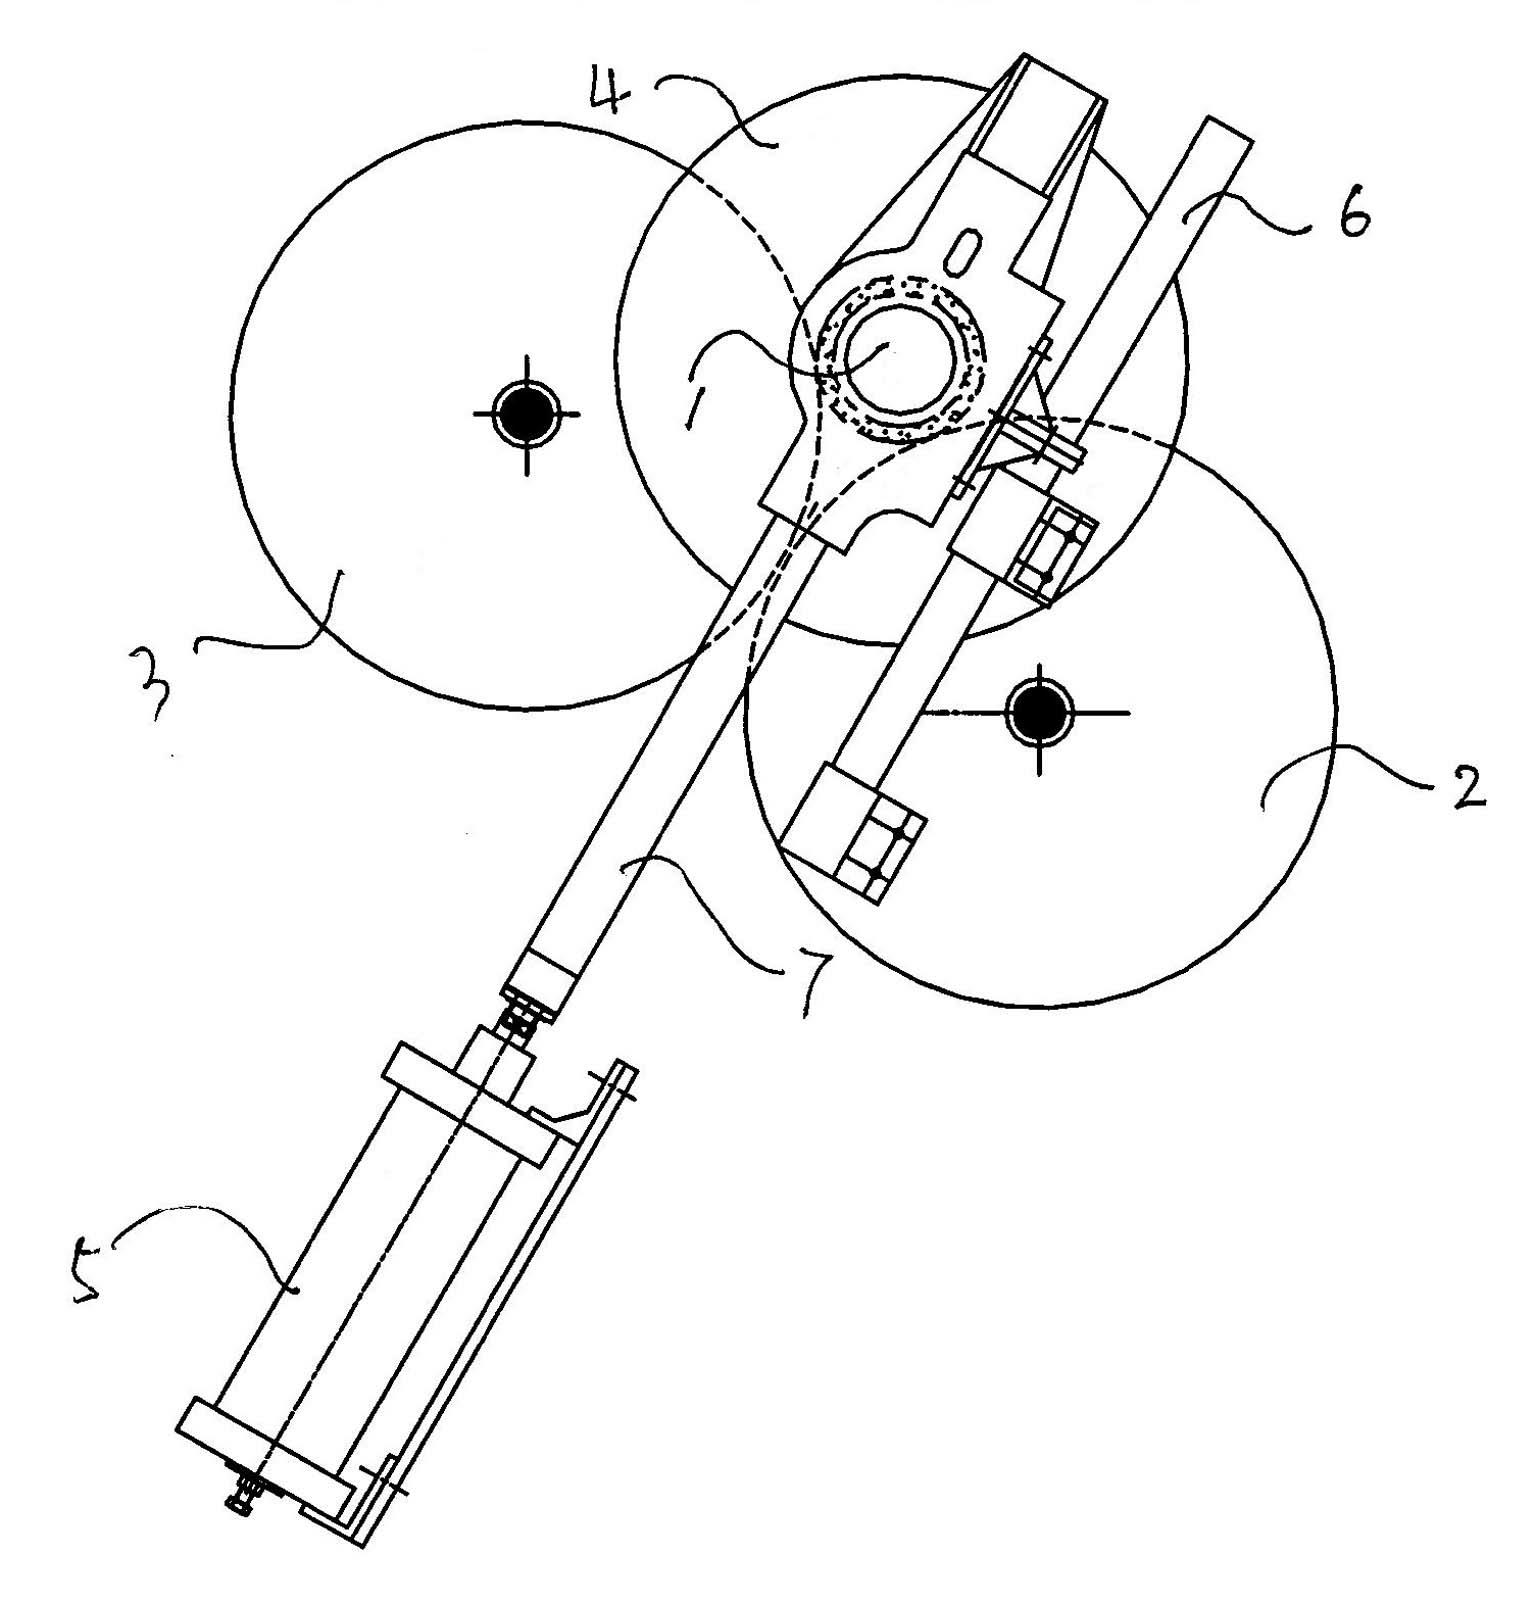 Single-cylinder pressure device applicable to cotton lap pressure of strip and lap combination machine